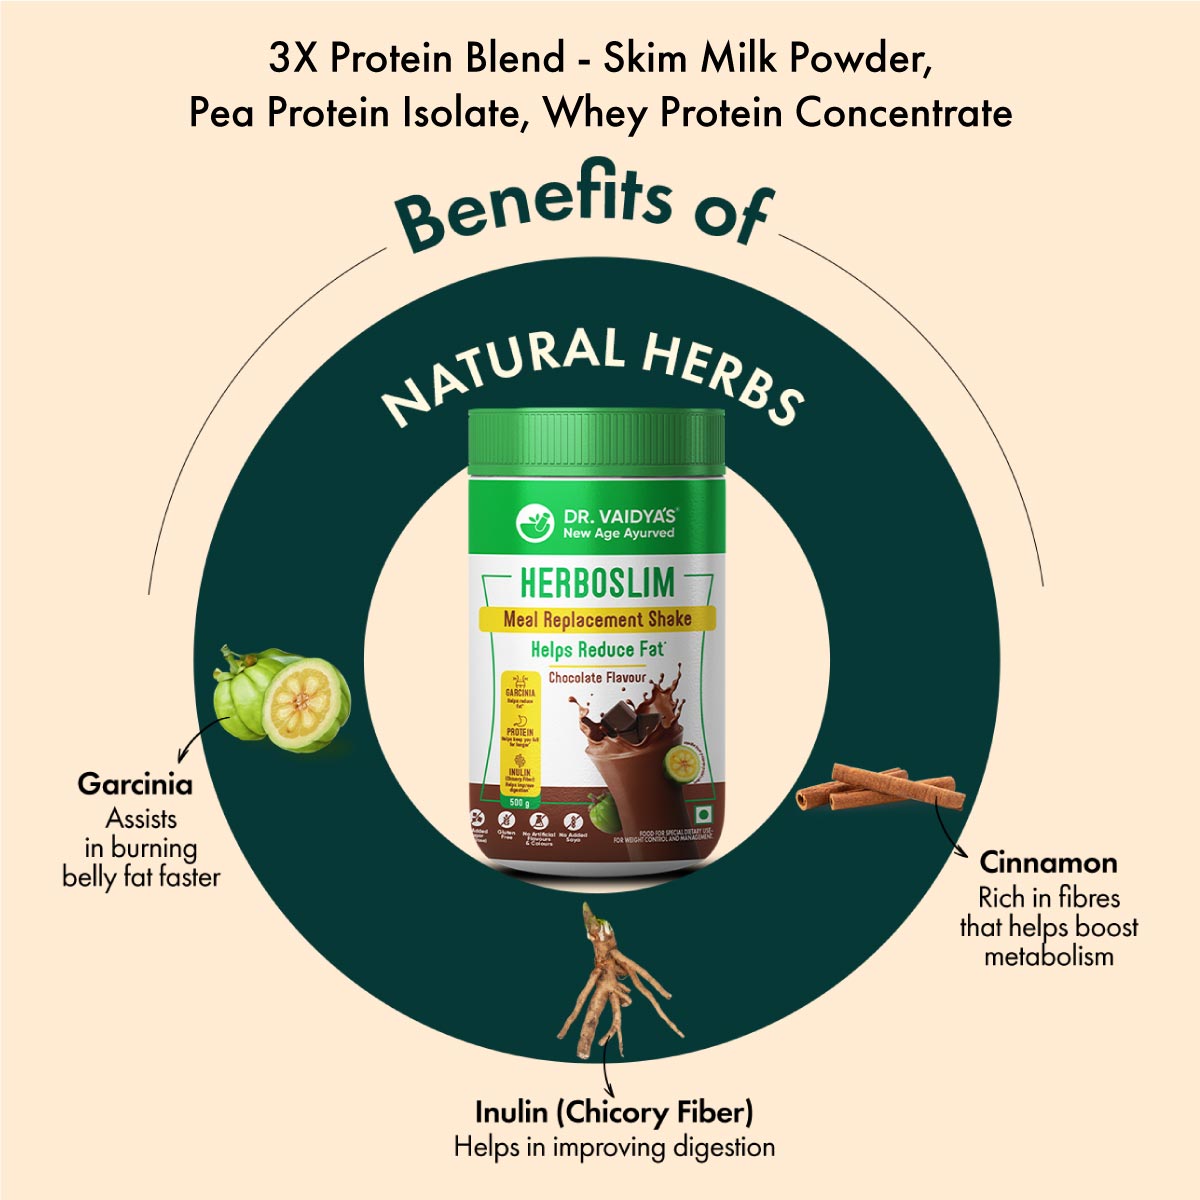 Herboslim Shake: Nutrition-Dense, Low Calorie Meal Replacement for Weight Management